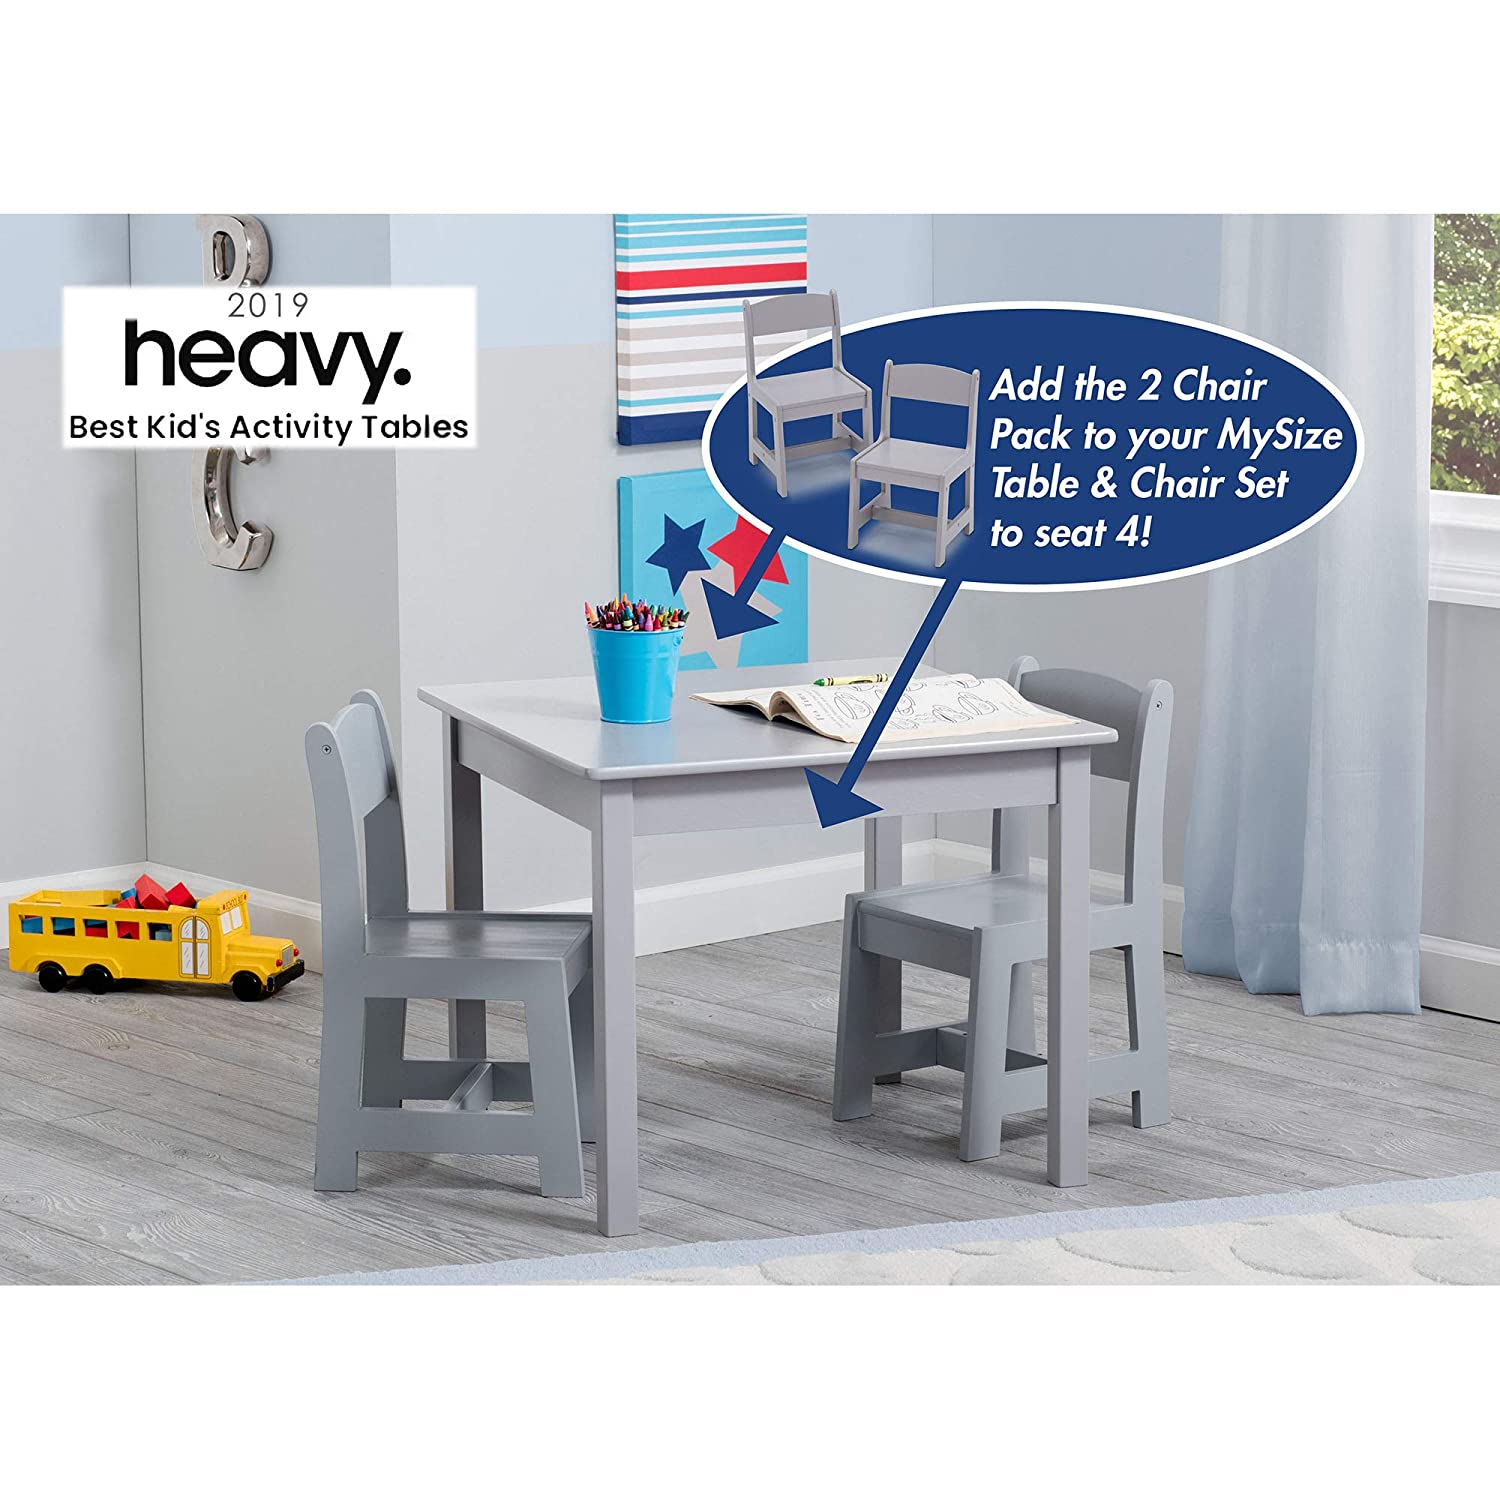 Delta Children MySize Kids Wood Table and Chair Set (2 Chairs Included) - Ideal for Arts & Crafts, Snack Time, Homeschooling, Homework & More, Grey